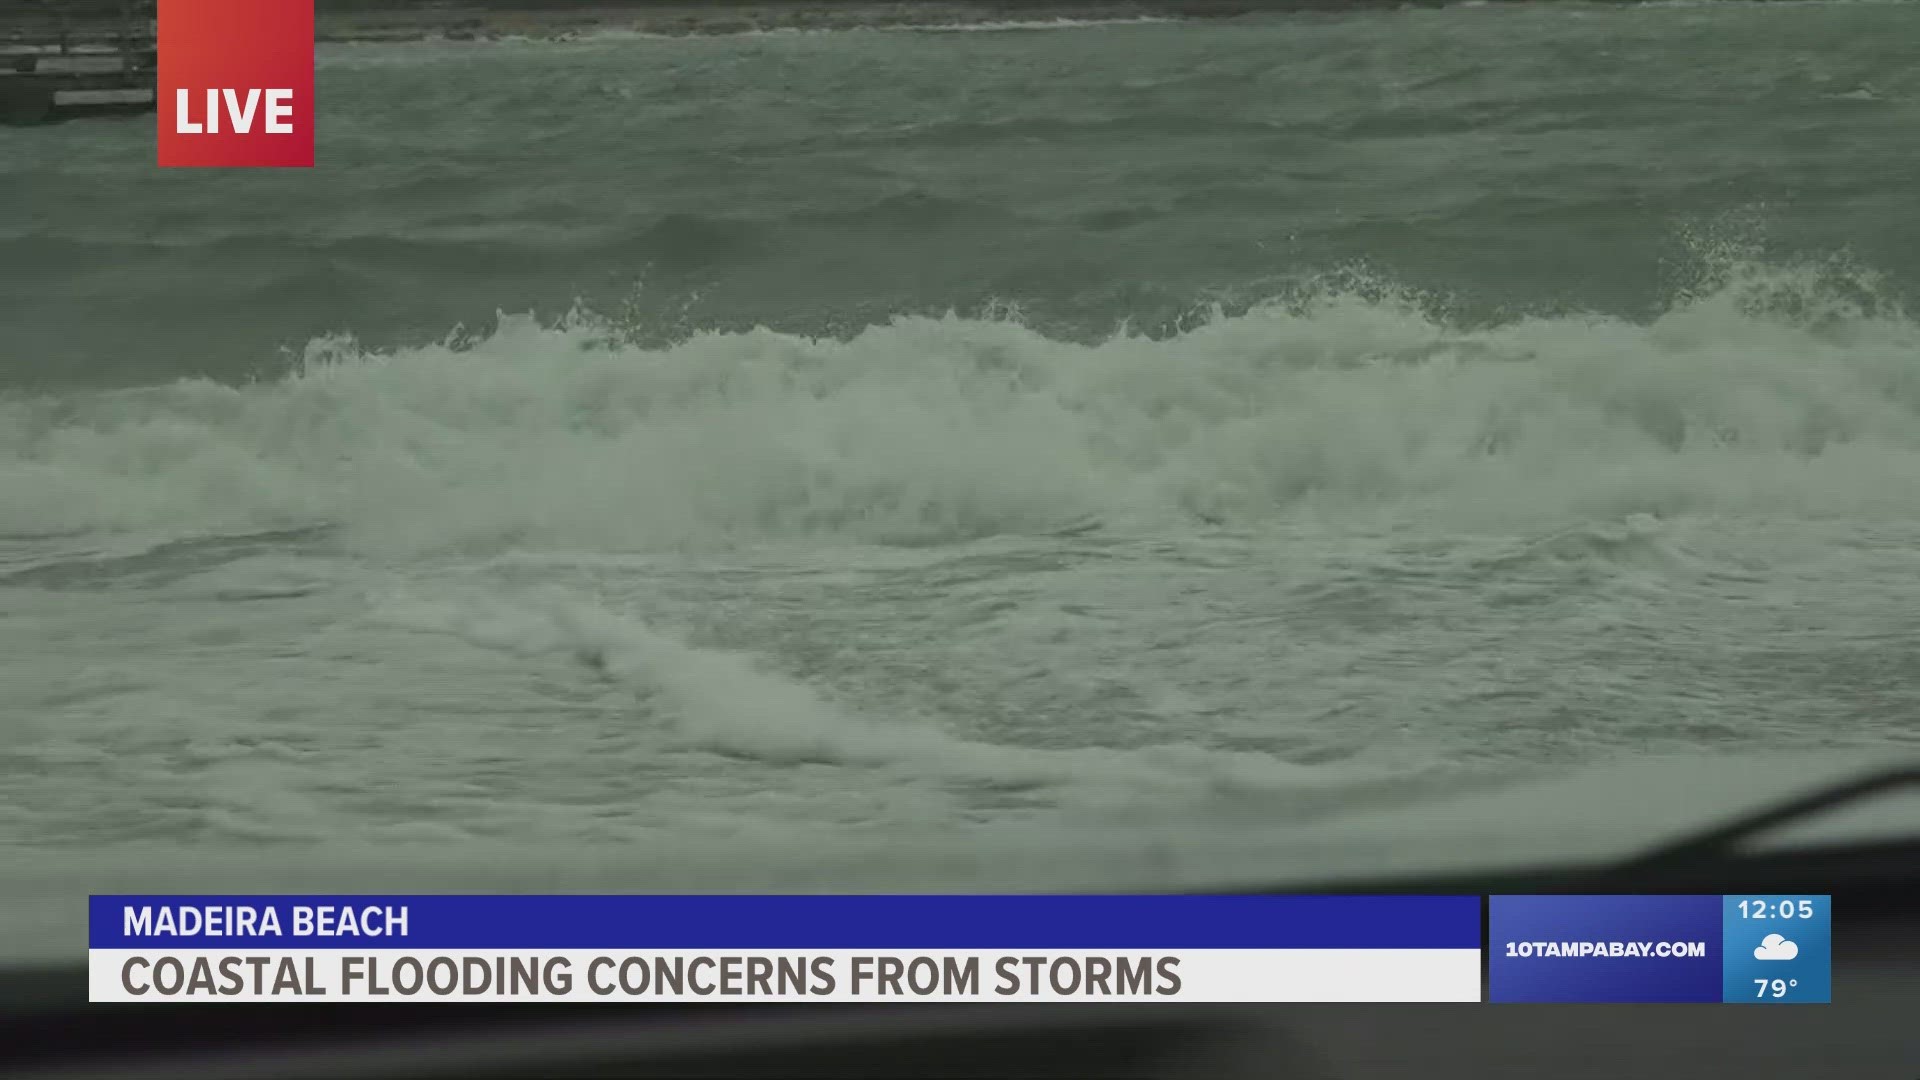 10 Tampa Bay's Malique Rankin reports lightning and waves crashing in overlooking John's Pass in Madeira Beach. Expect 2-4 feet above normal tide levels.